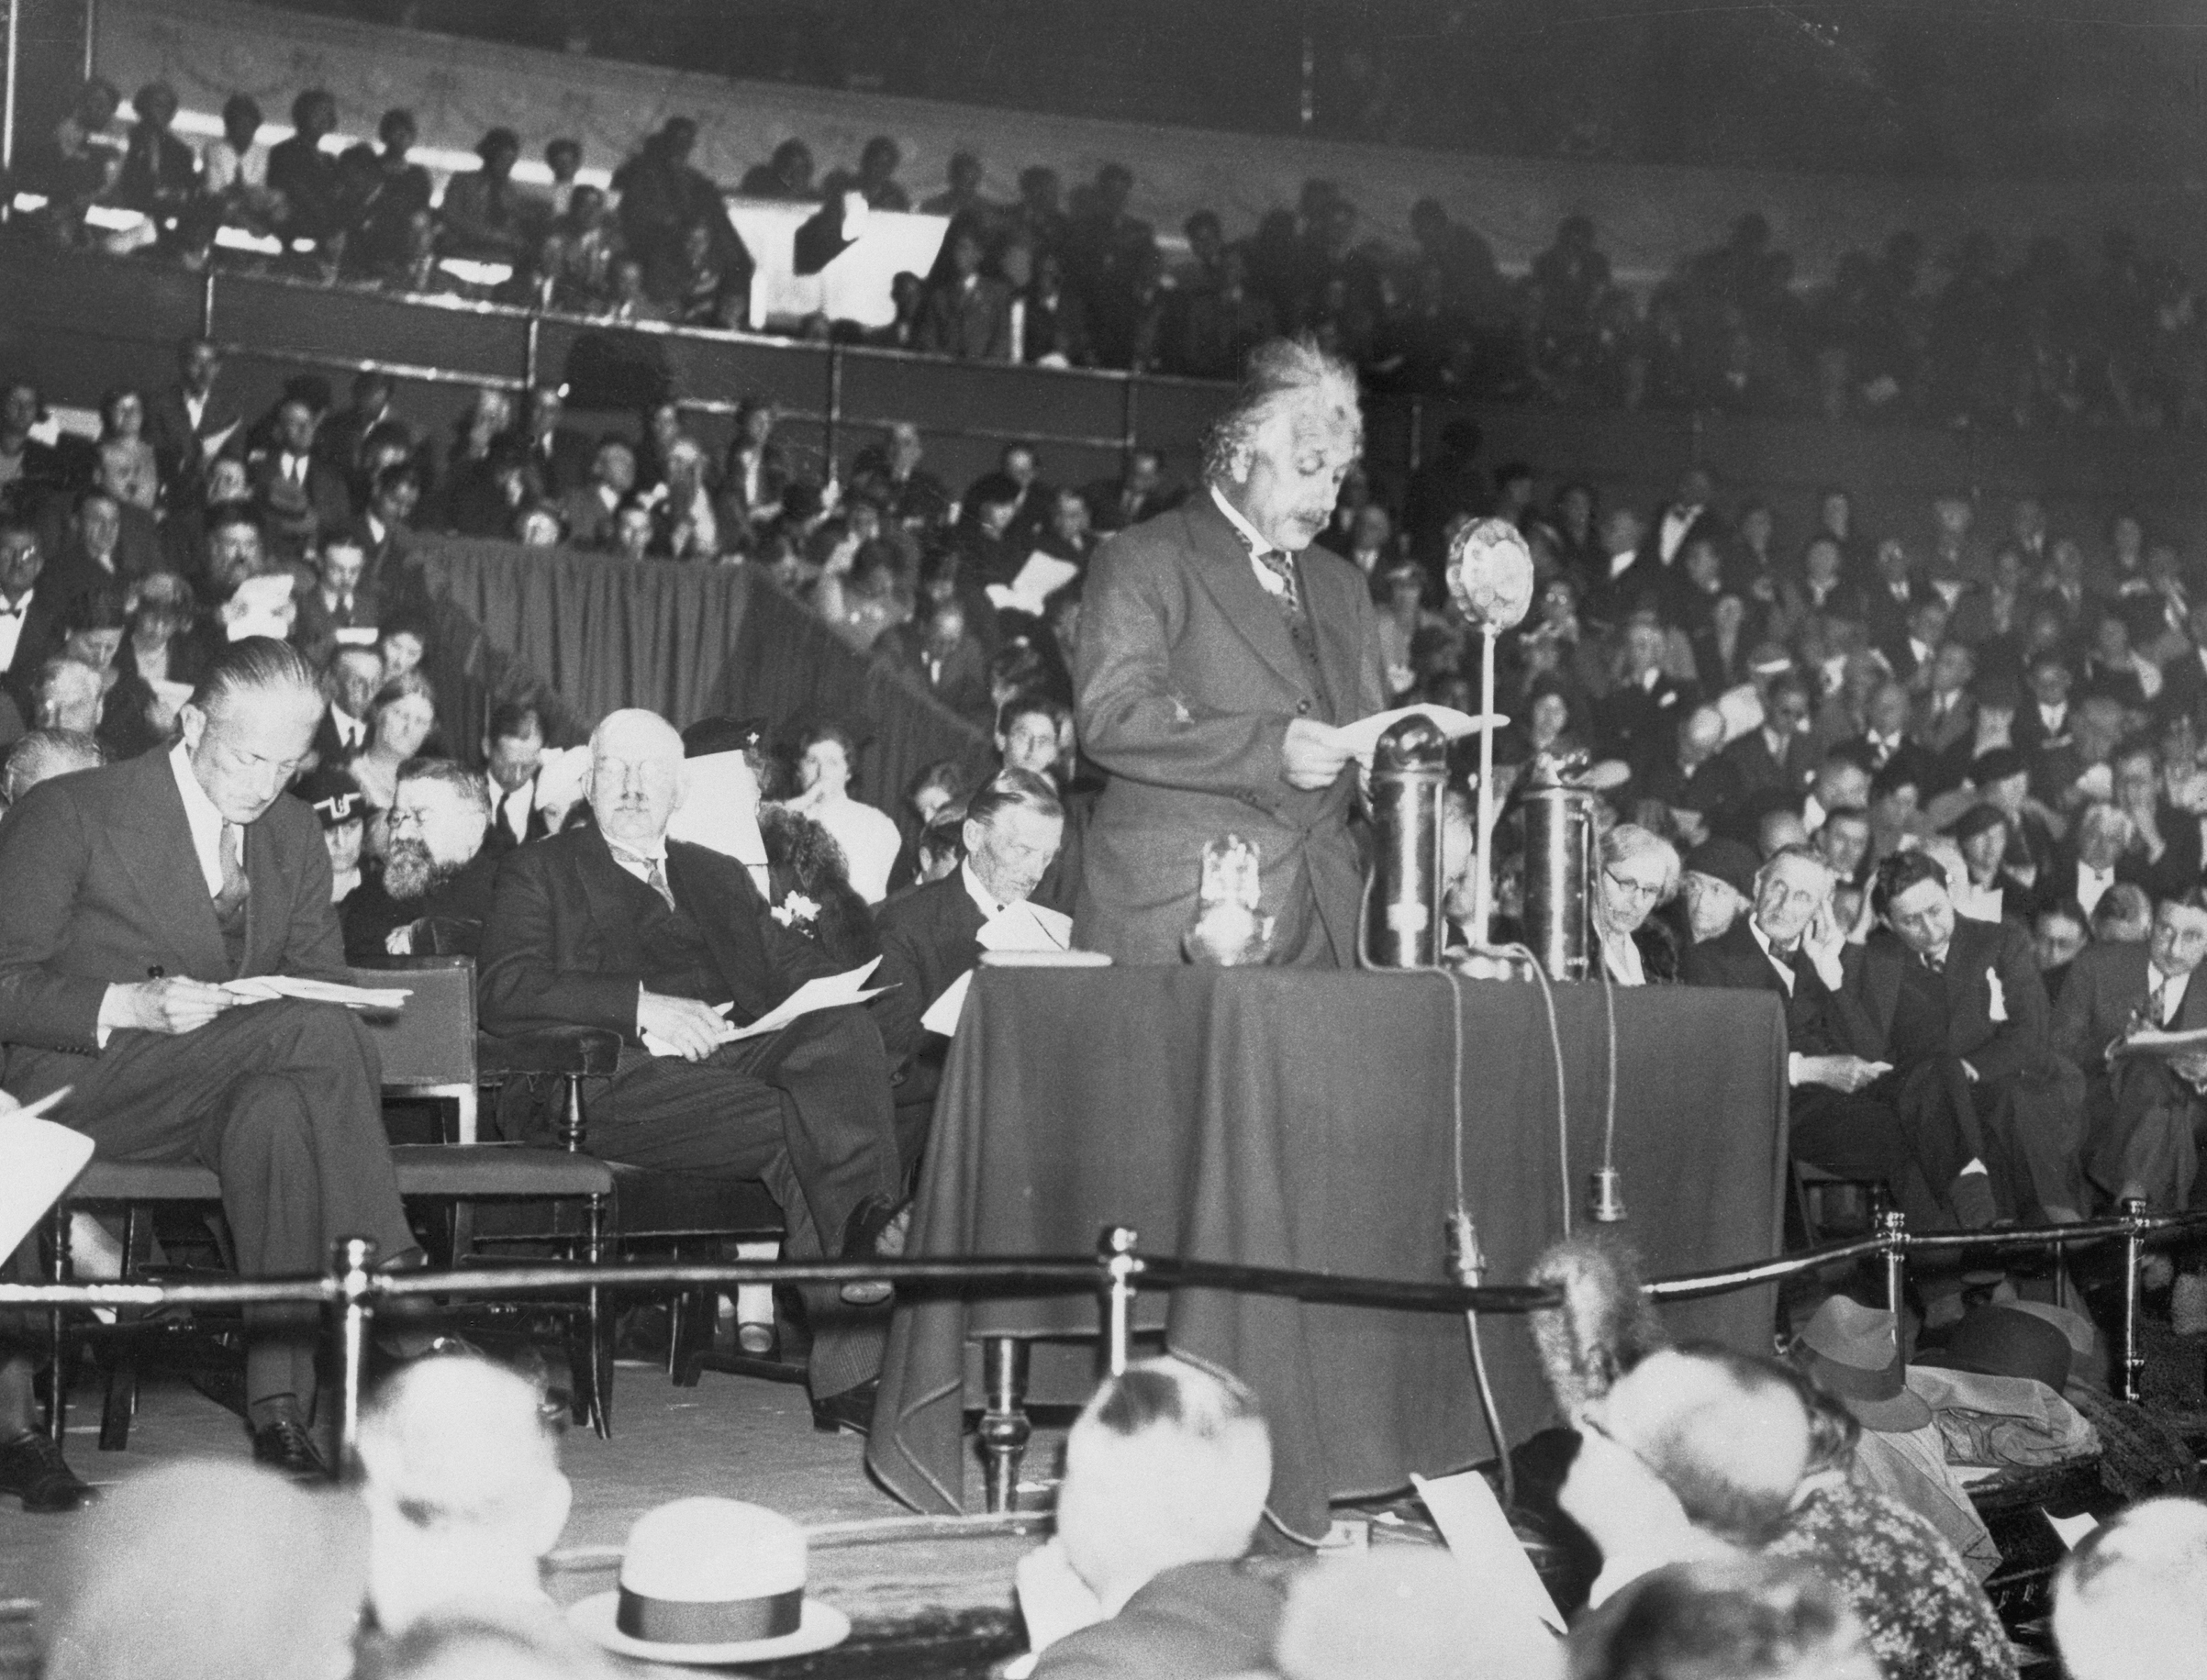 Professor Albert Einstein, who has taken up residence in England as a refugee from Nazi threats, was among the prominent speakers who addressed a great gathering at the Royal Albert Hall in London, recently, to aid the Jewish Refugee Fund. Commander Locker Lampson, M.P., Lord Rutherford and Sir Austen Chamberlain were among the principal speakers of the meeting. Photo shows Professor Einstein during the delivery of his speech. October 1933. (Bettmann/Getty Images)